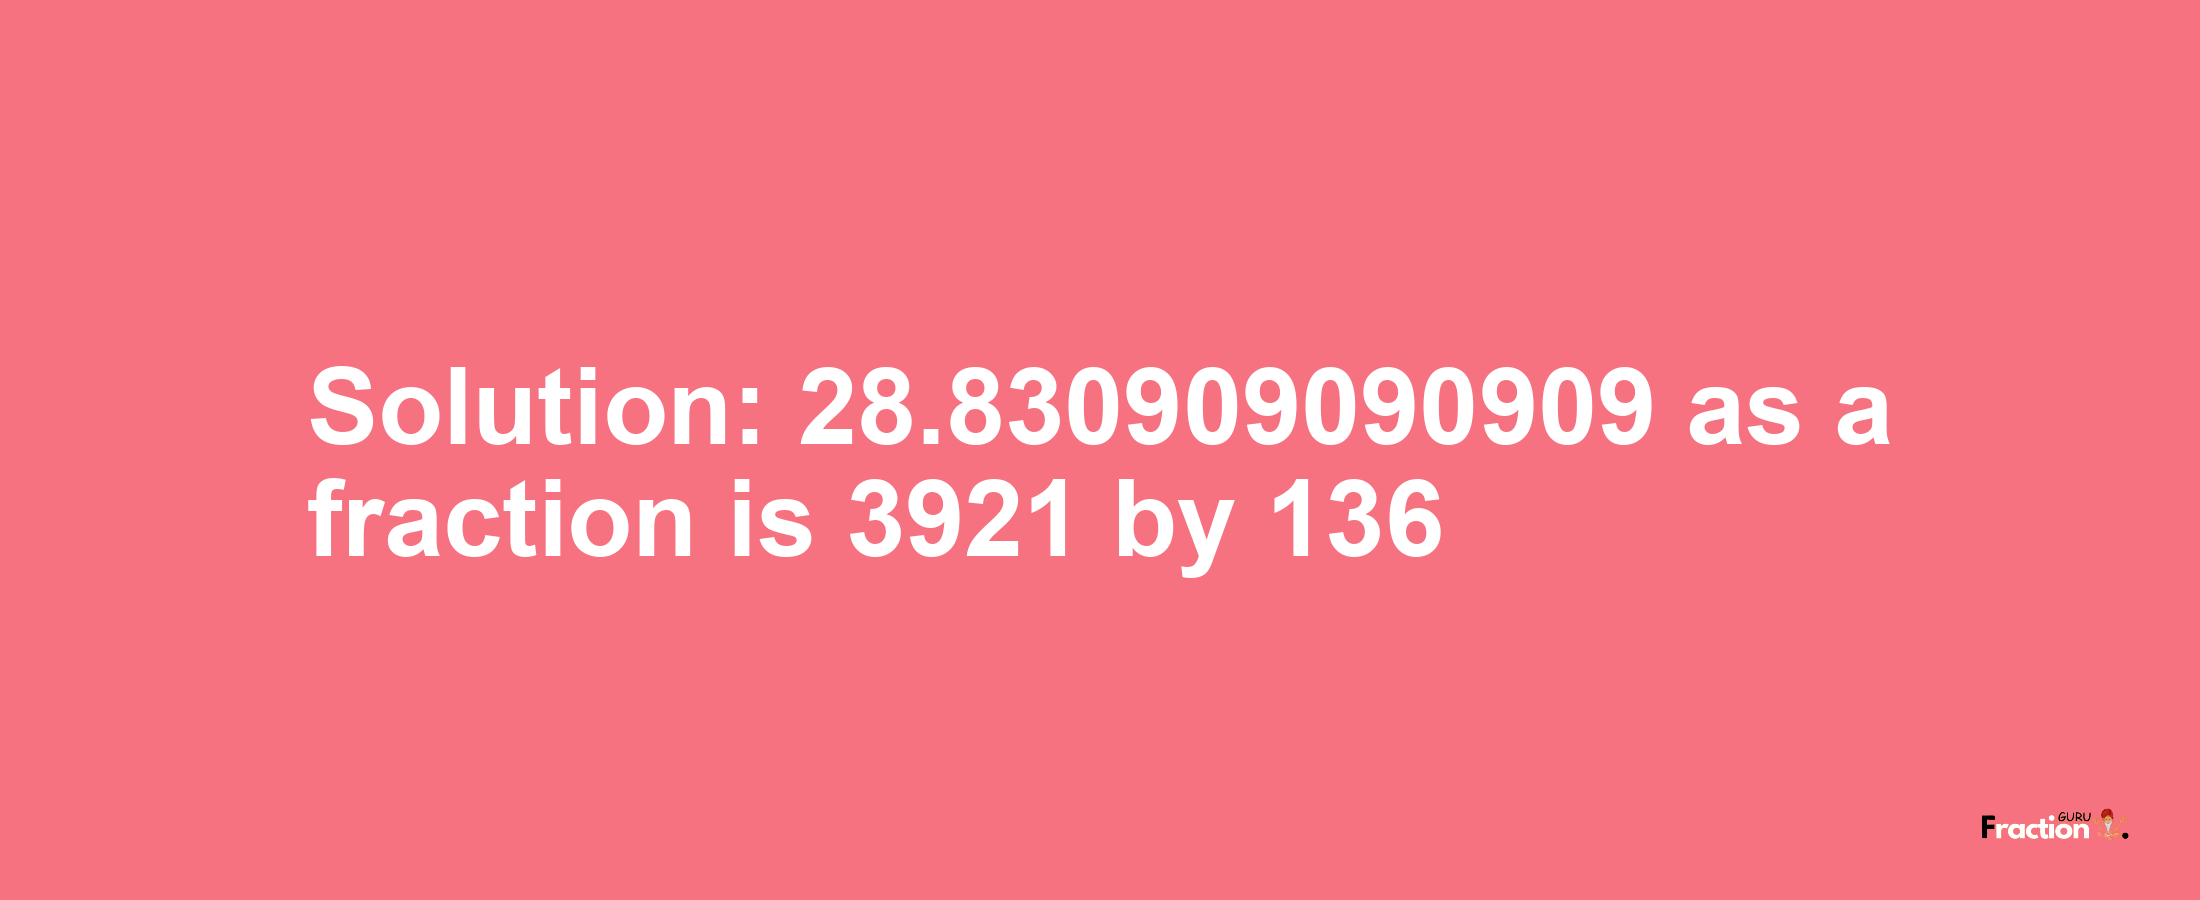 Solution:28.830909090909 as a fraction is 3921/136